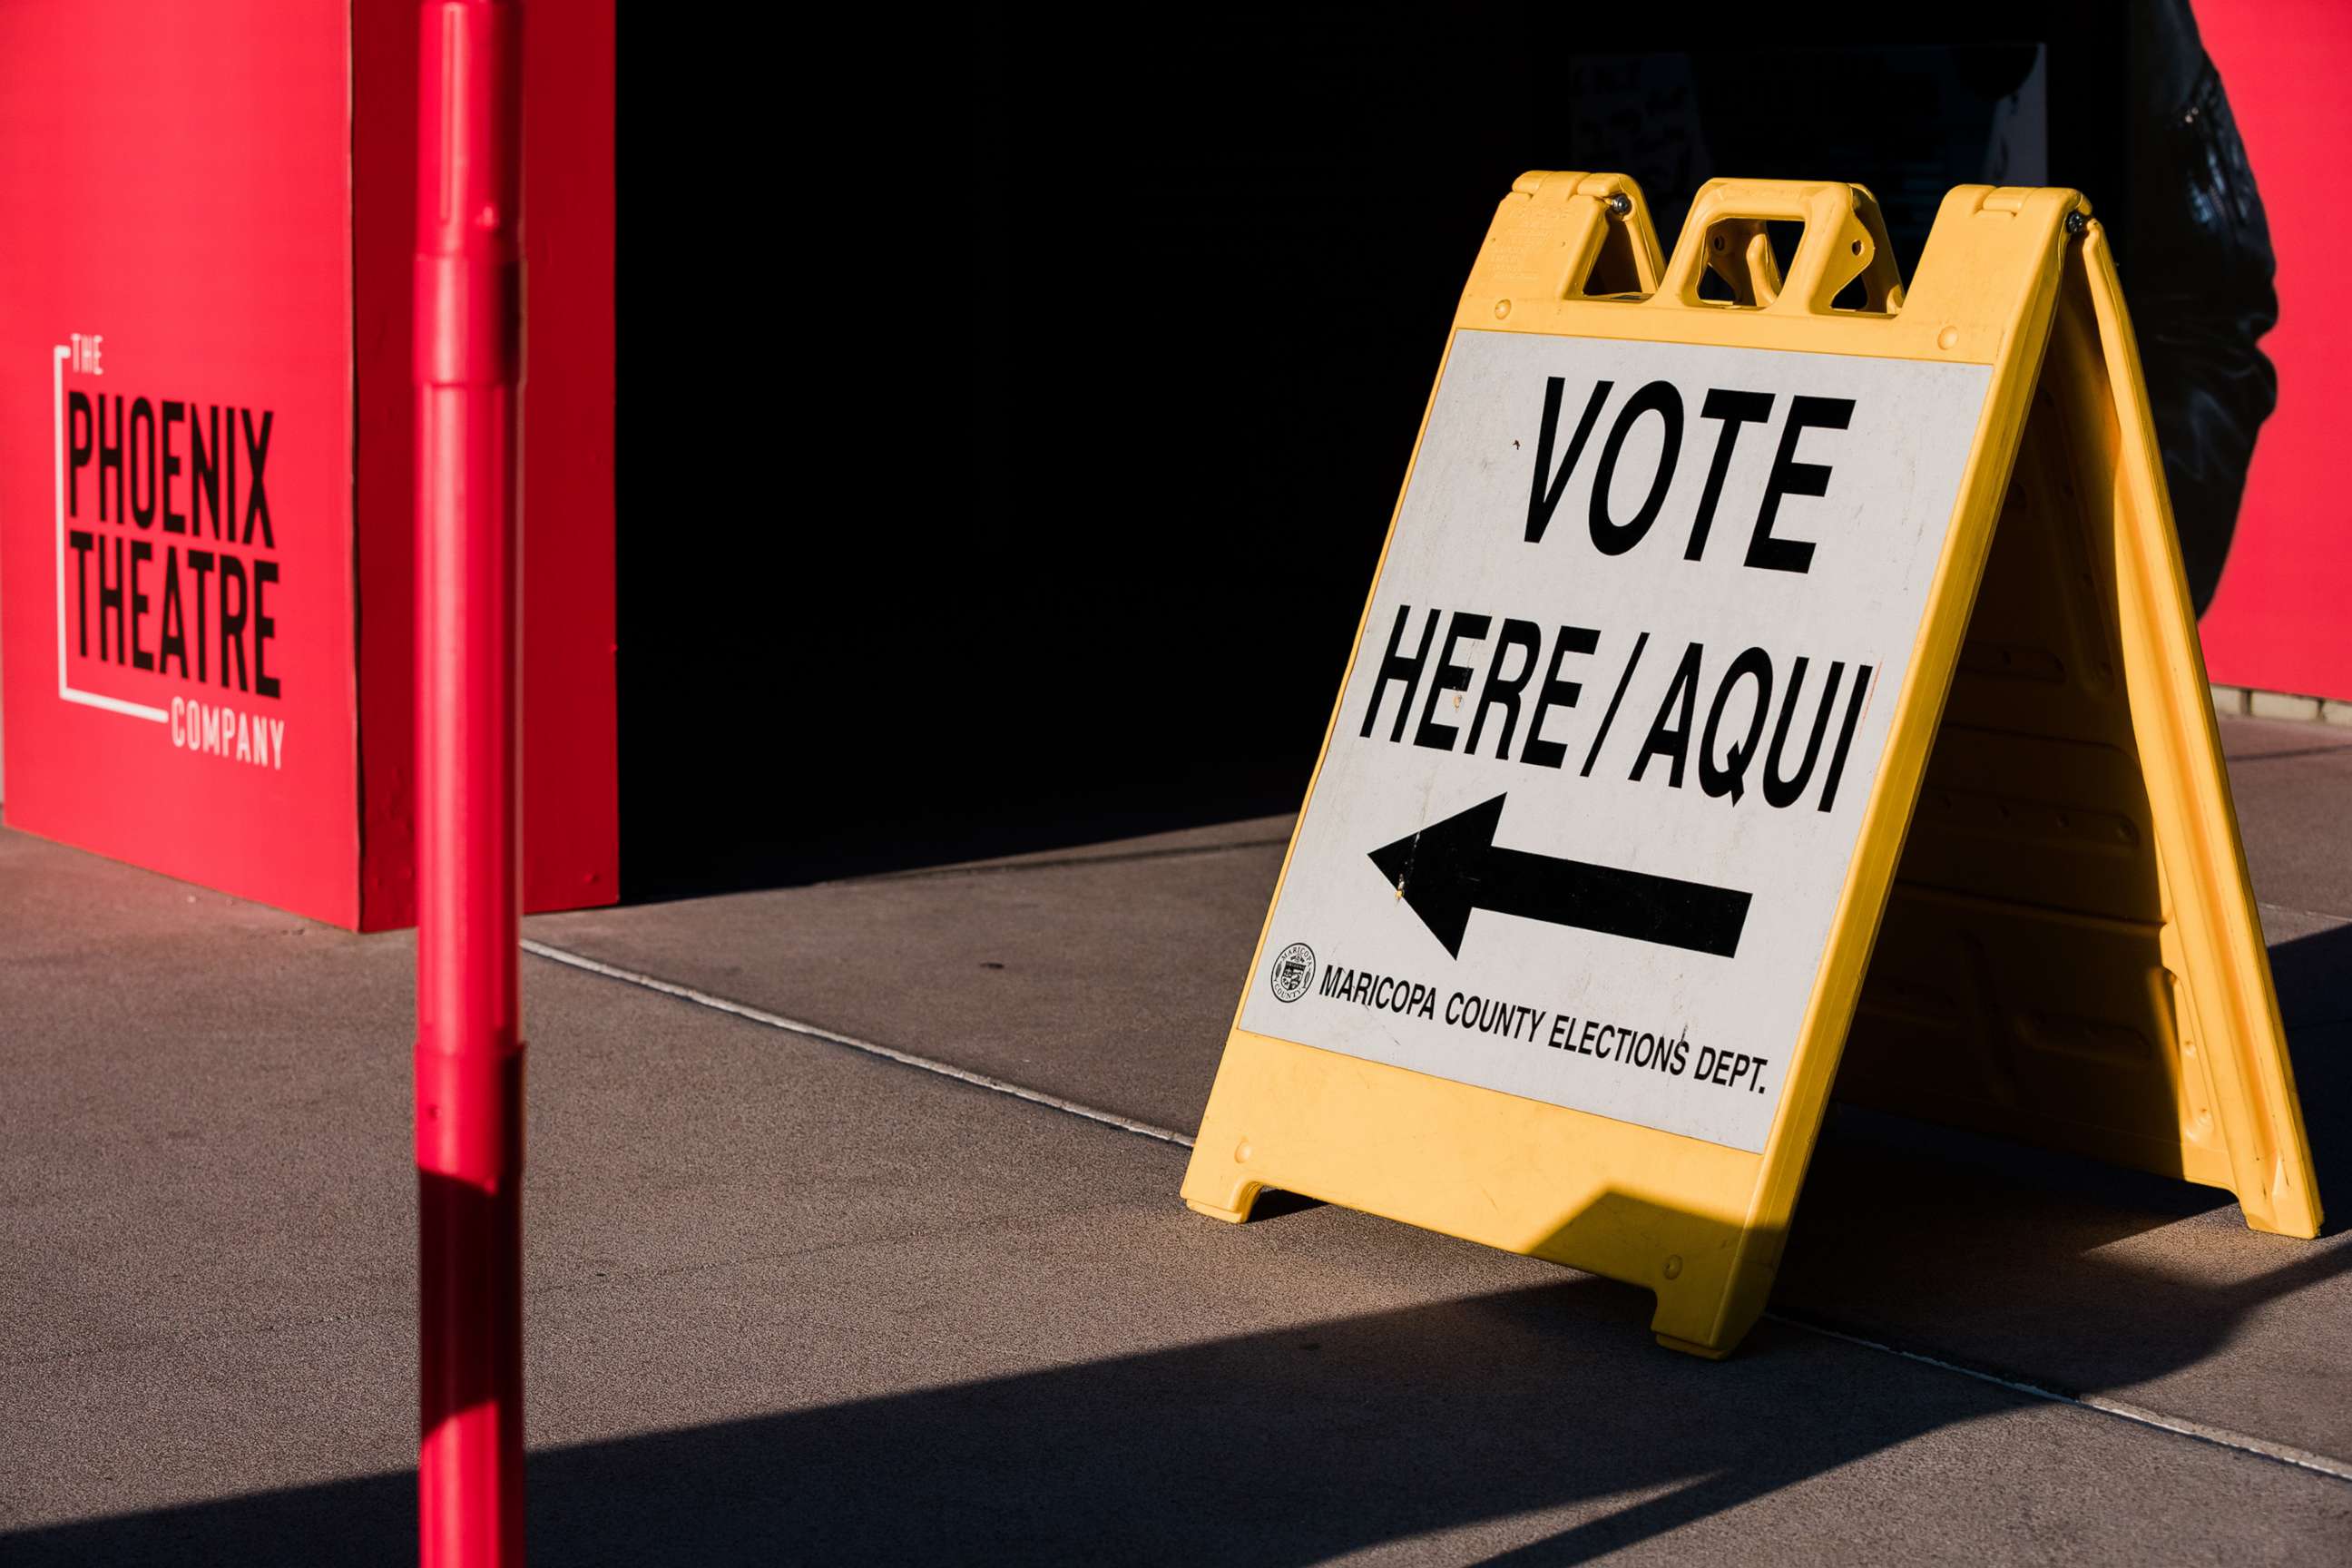 PHOTO: In this Aug. 2, 2022, file photo, a "Vote Here" sign is shown outside a polling location at the Phoenix Art Museum in Phoenix, Arizona.